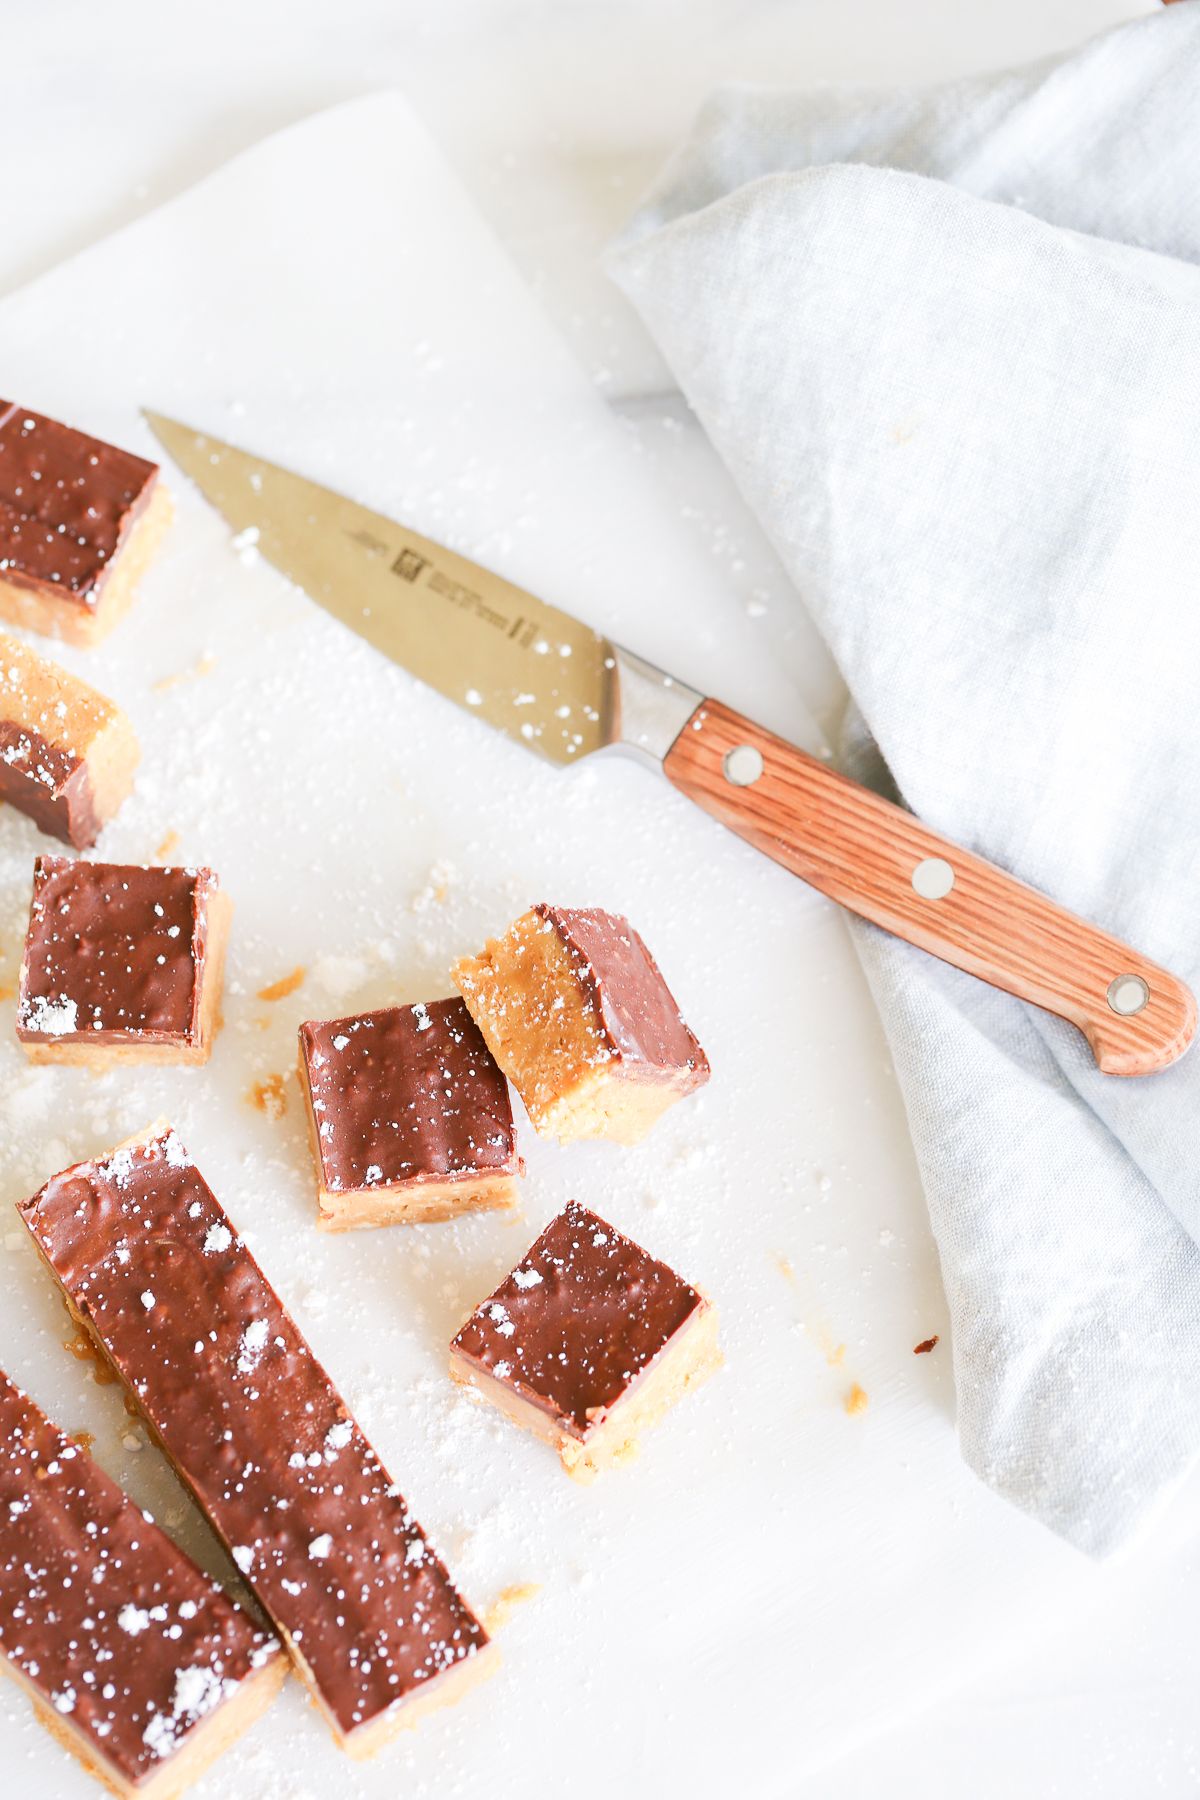 No bake cookie butter bars on a marble countertop, a knife for cutting them nearby.